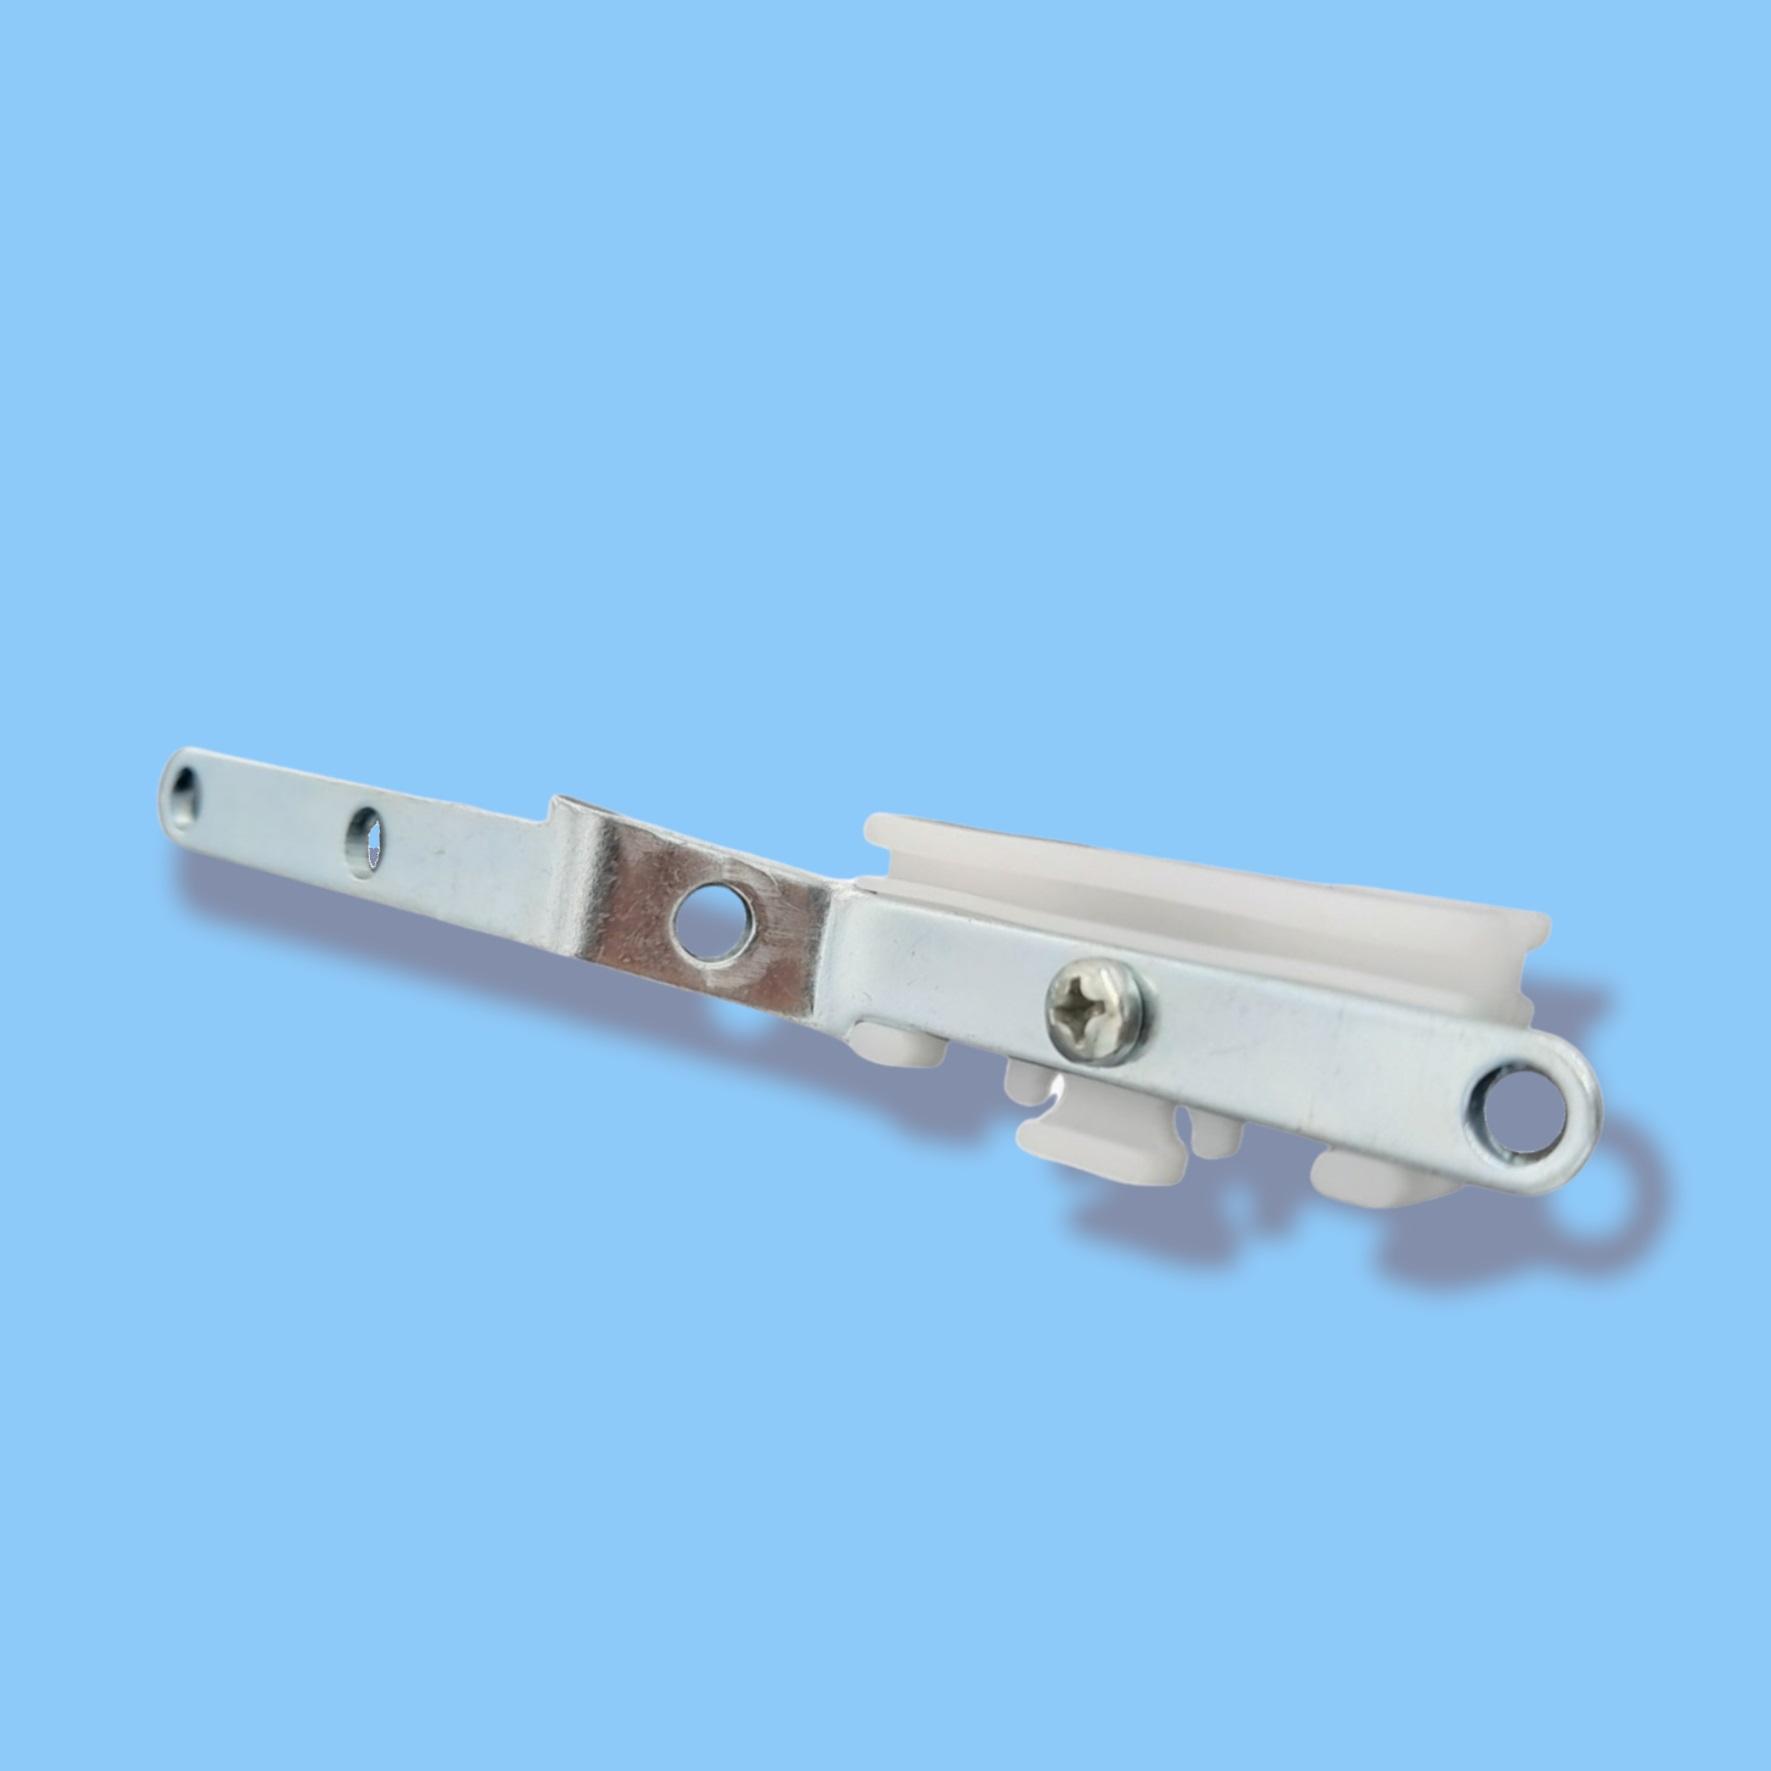 Overlap glider (master carrier) for cord operated curtain track